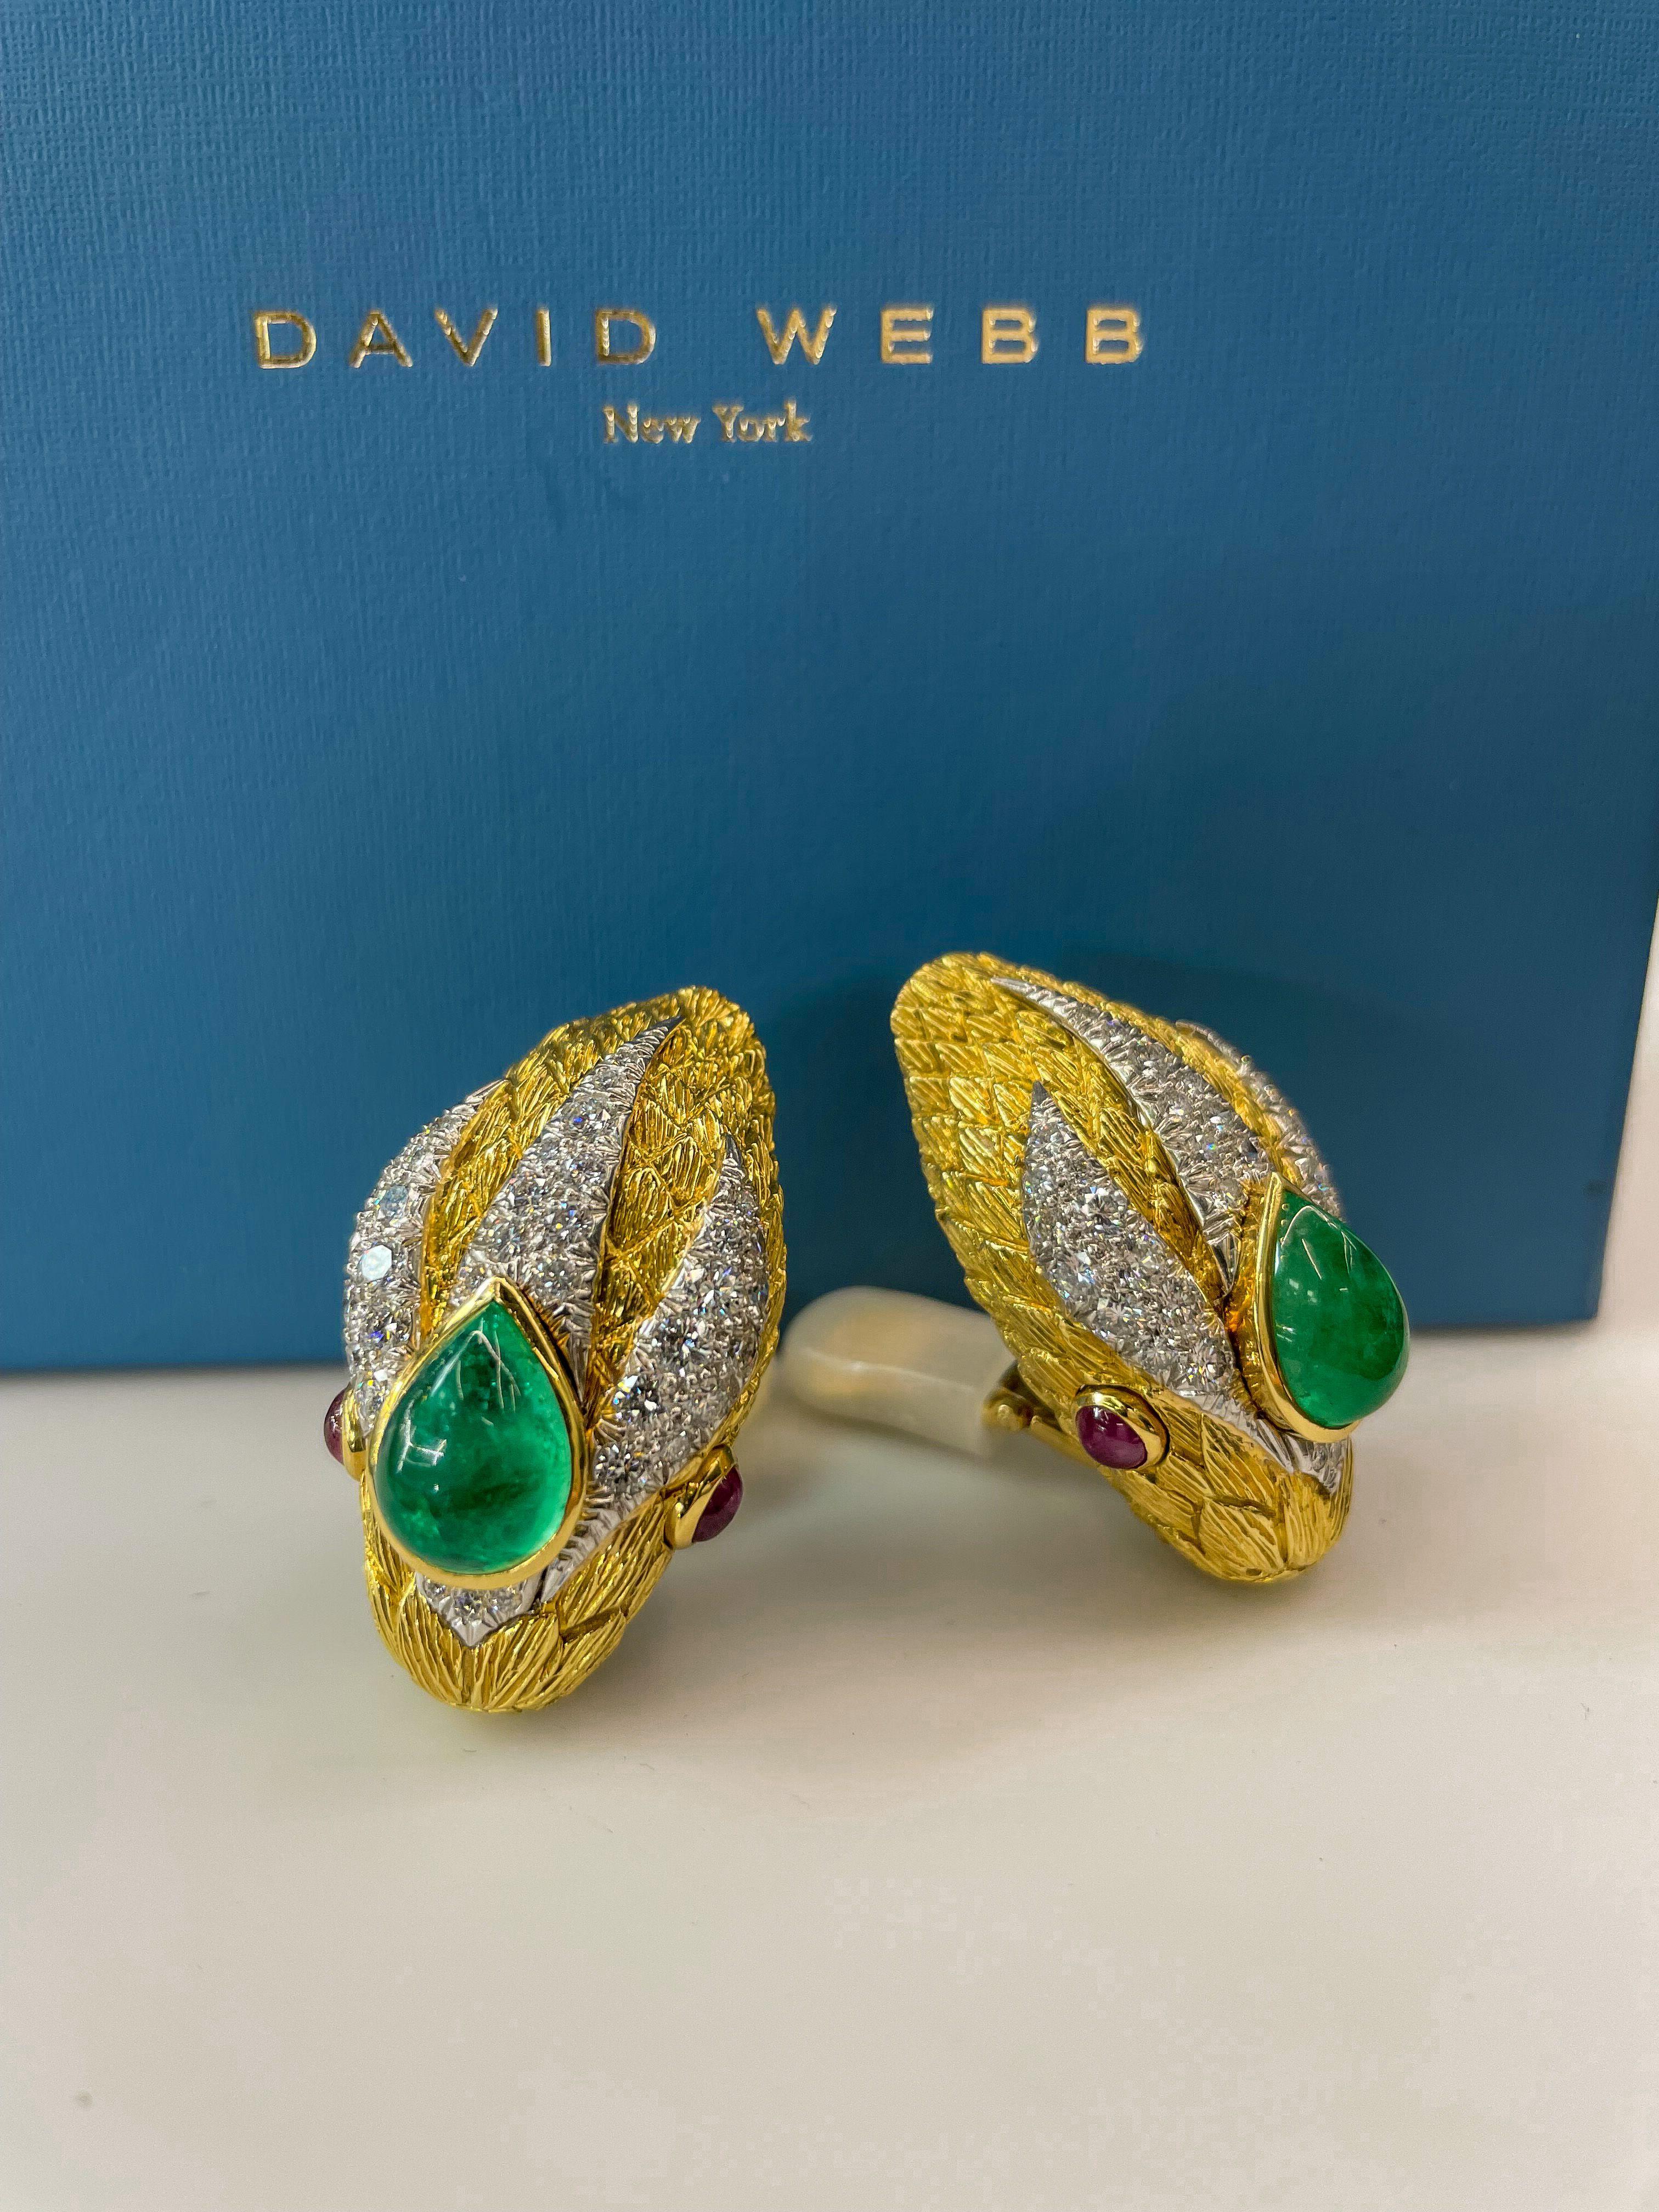 David Webb was a master jewelry designer, known for his bold and unique designs that often featured natural motifs. One such piece is his 18k yellow gold clip earrings fashioned as serpent heads, mounted with green cabochon cut green emeralds on the